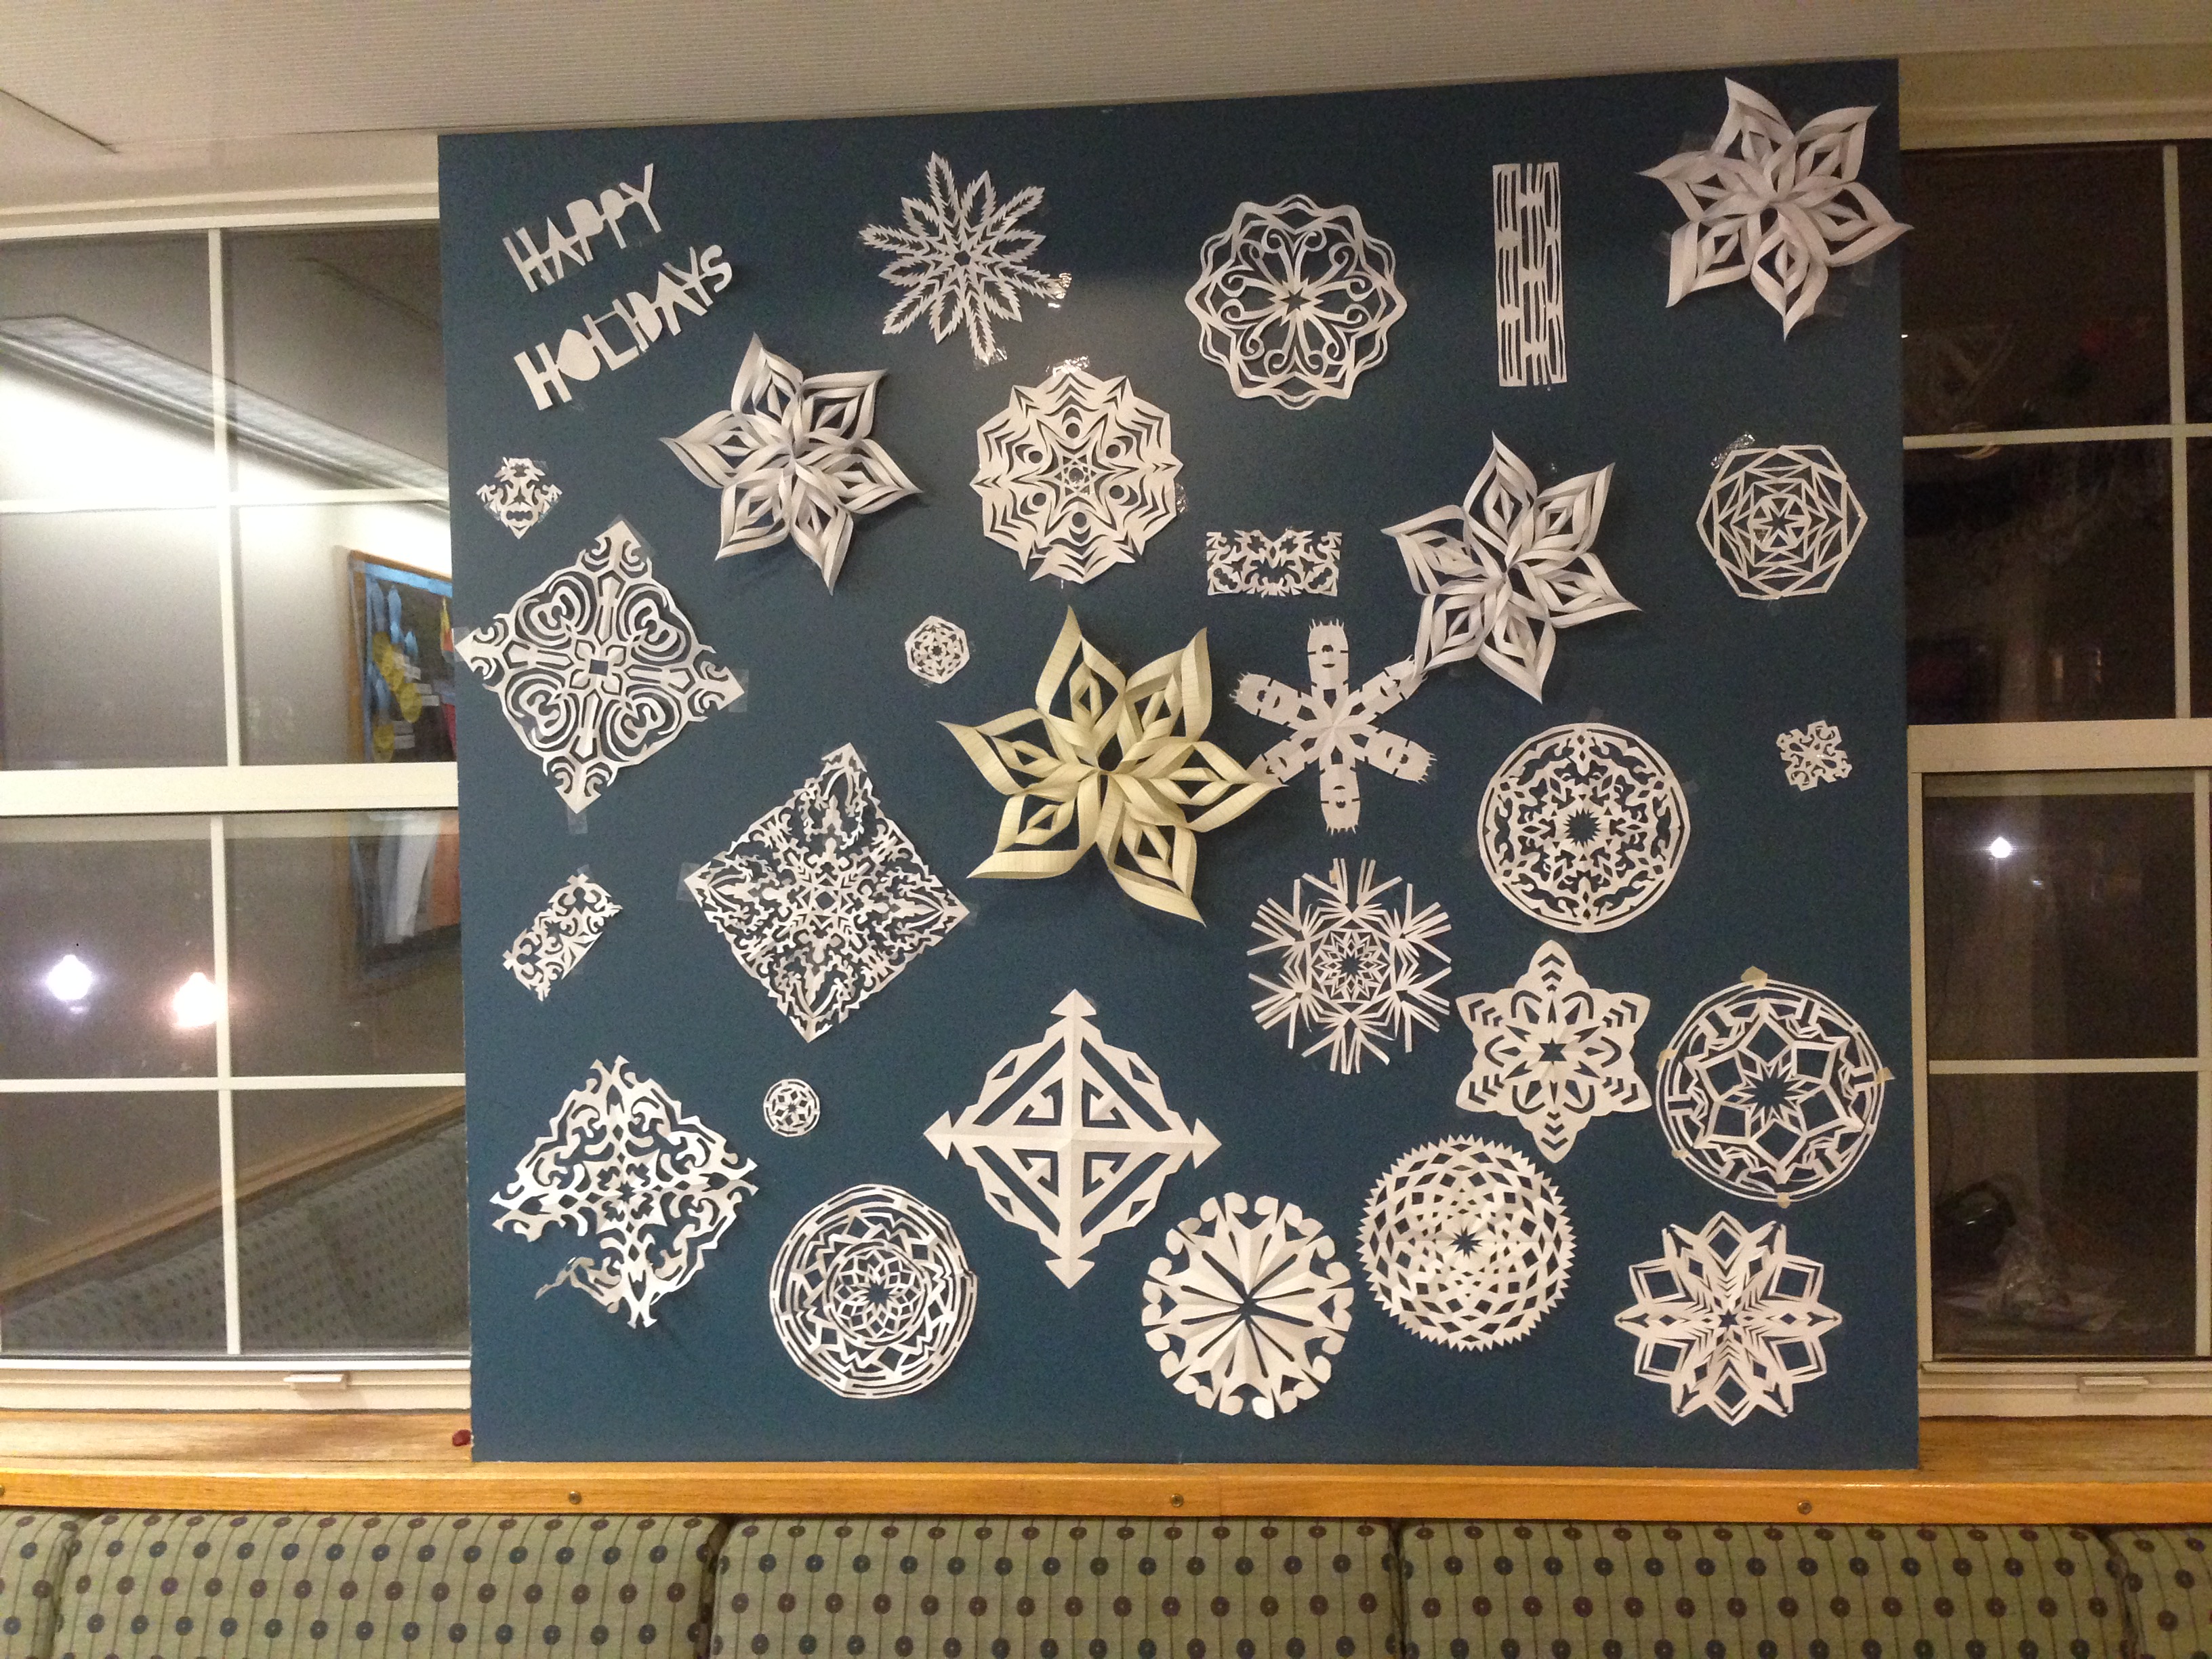 We made snowflakes for my D'Lions hall program!